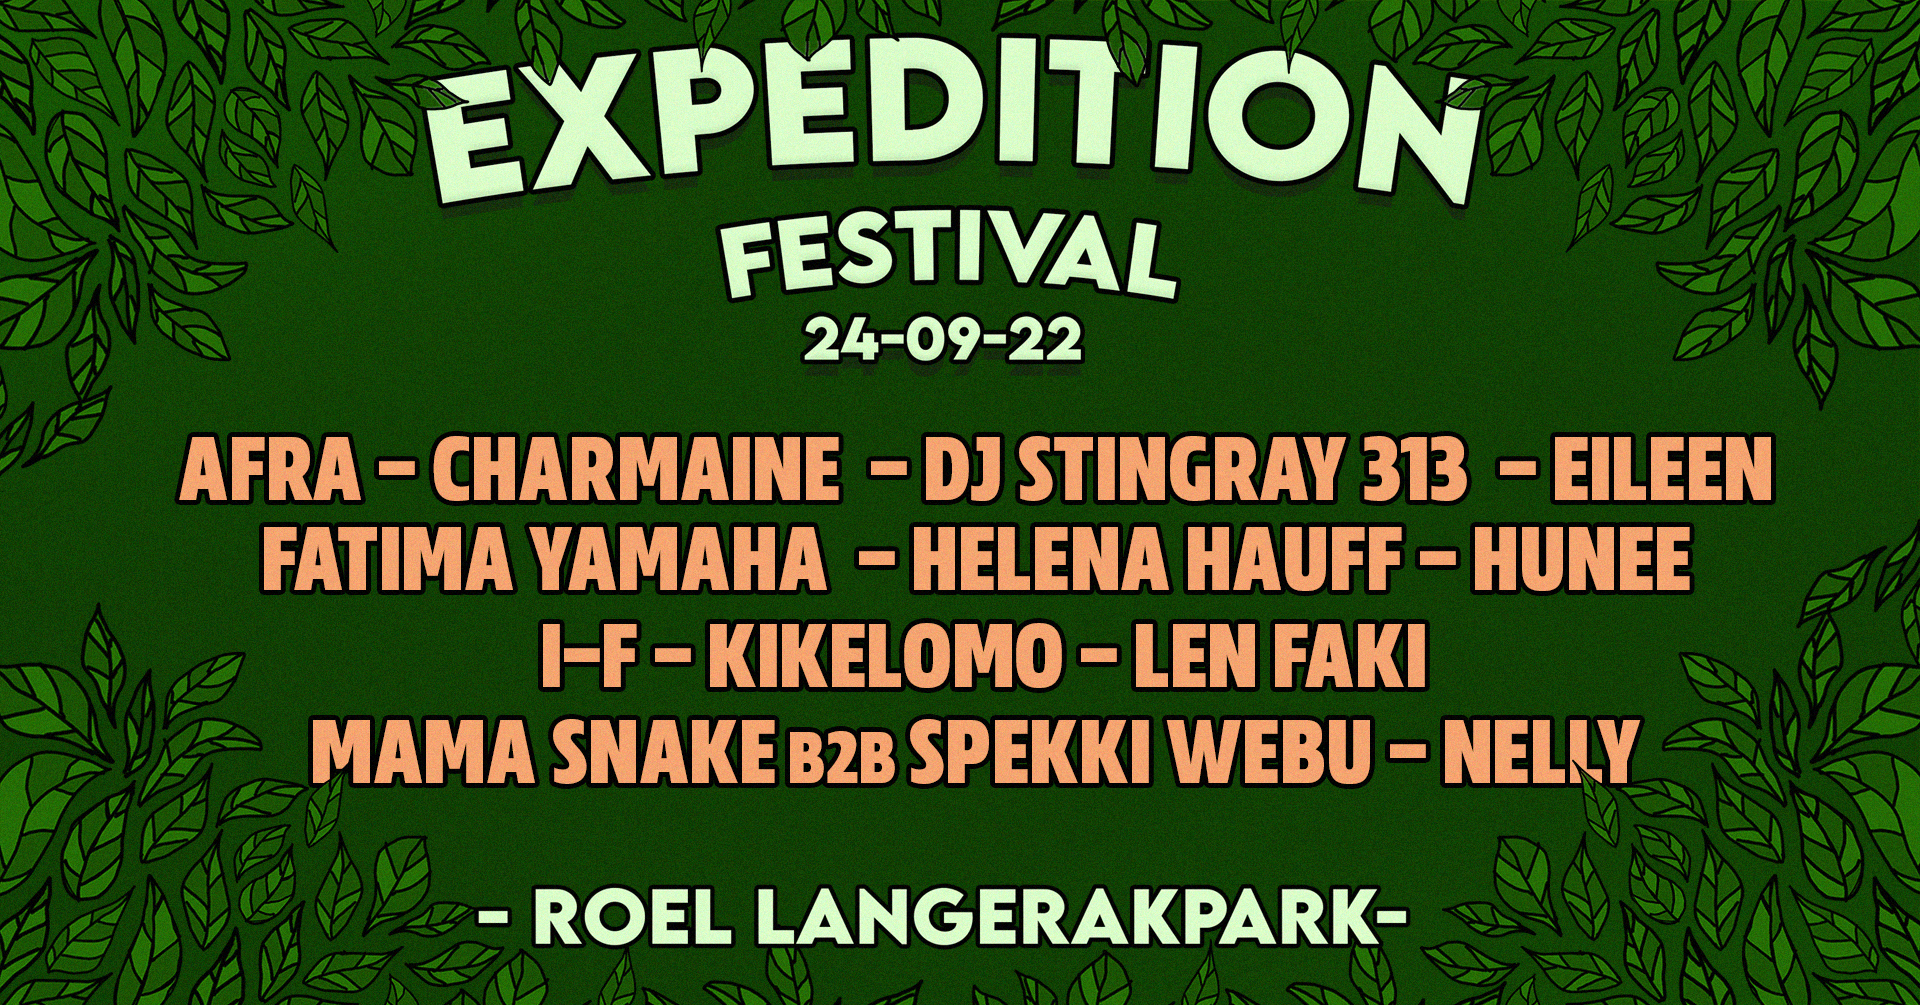 Expedition Festival 2022 - Flyer front